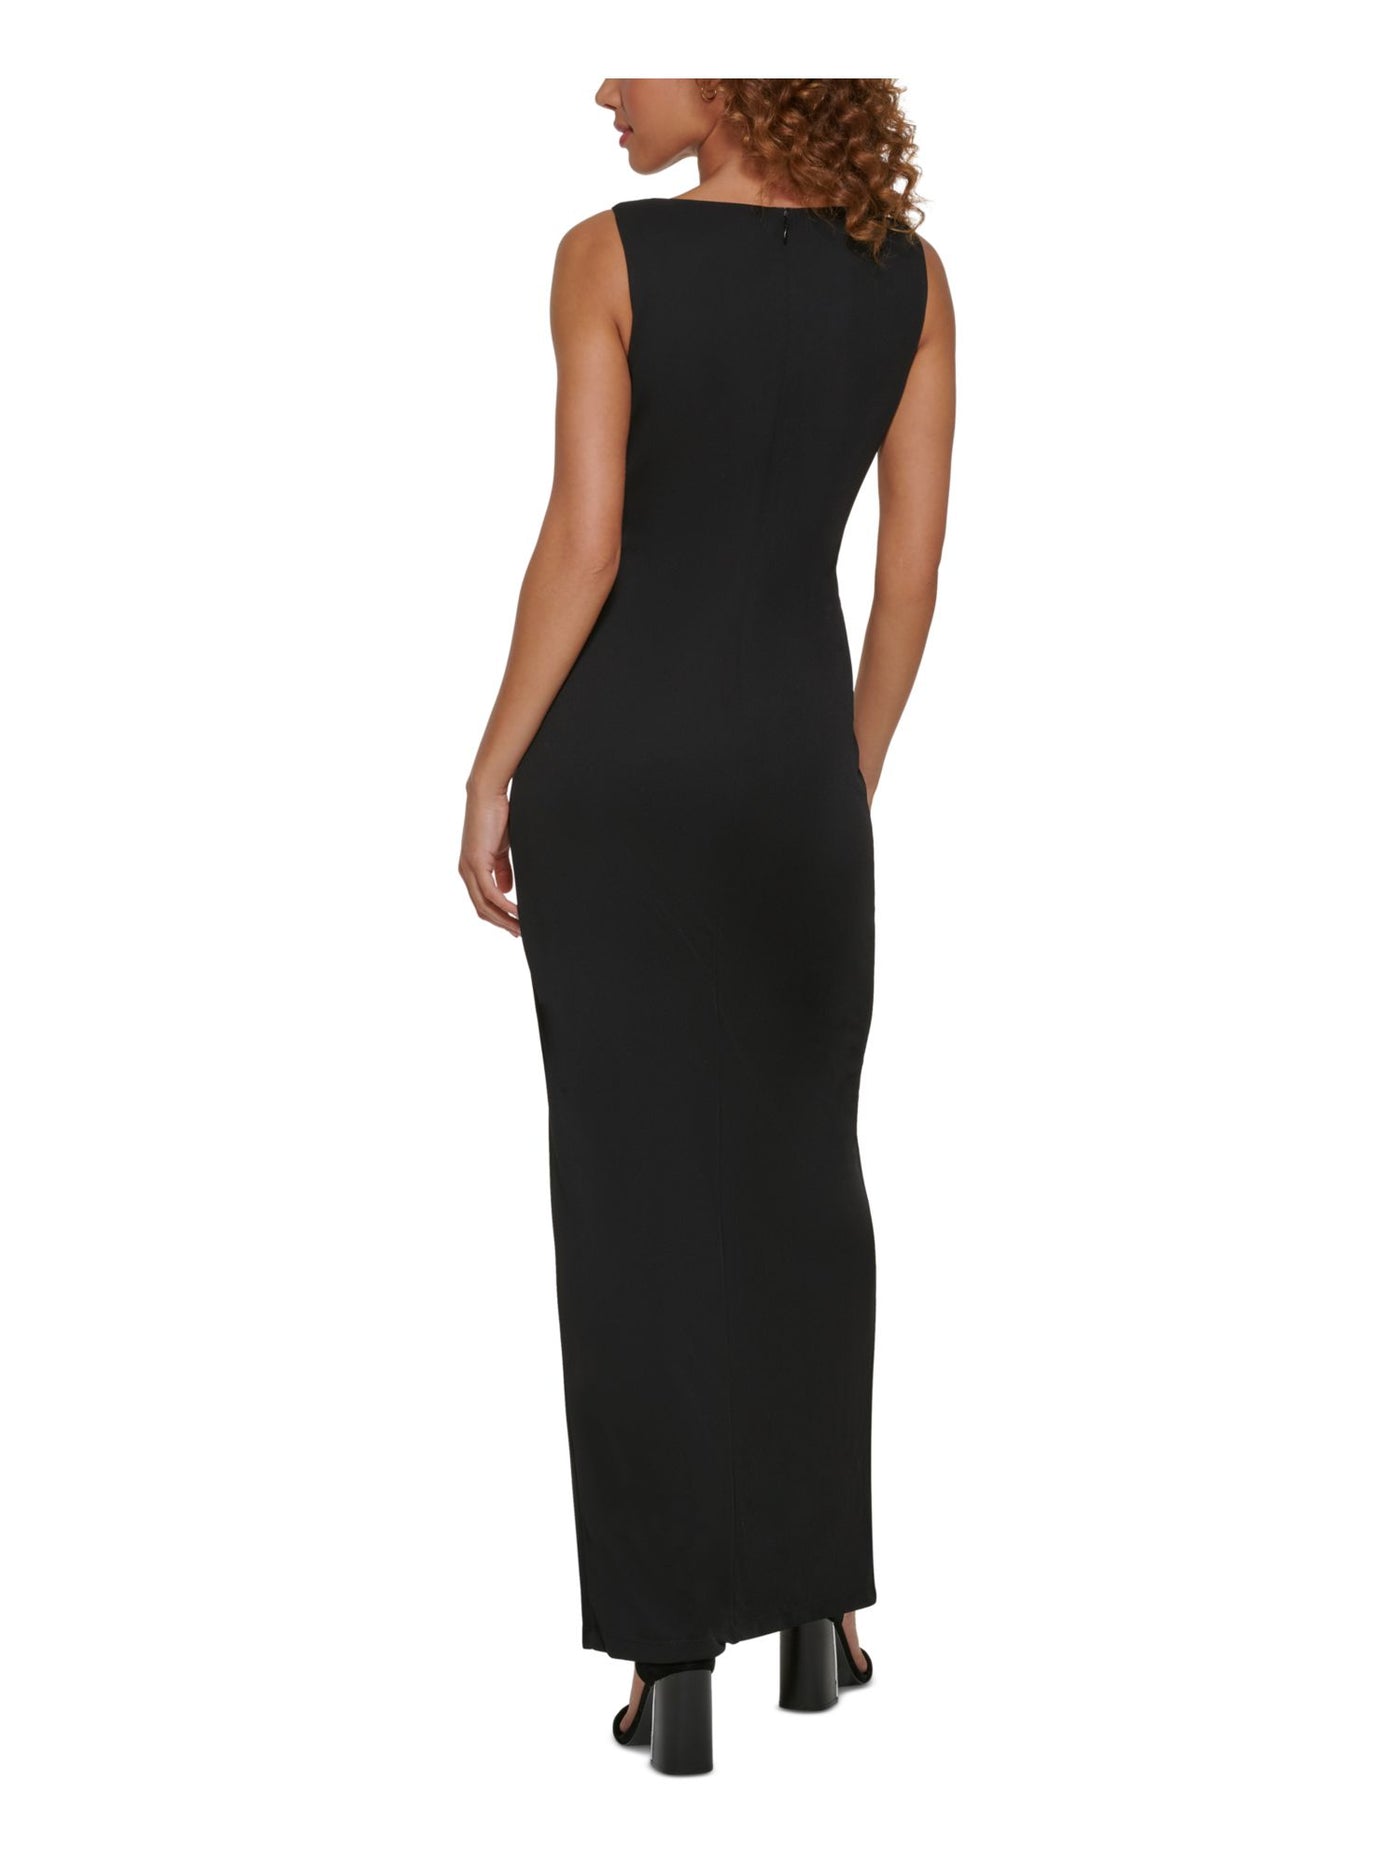 CALVIN KLEIN Womens Black Zippered Ruched Cut Outs Lined Sleeveless V Neck Full-Length Formal Gown Dress 2